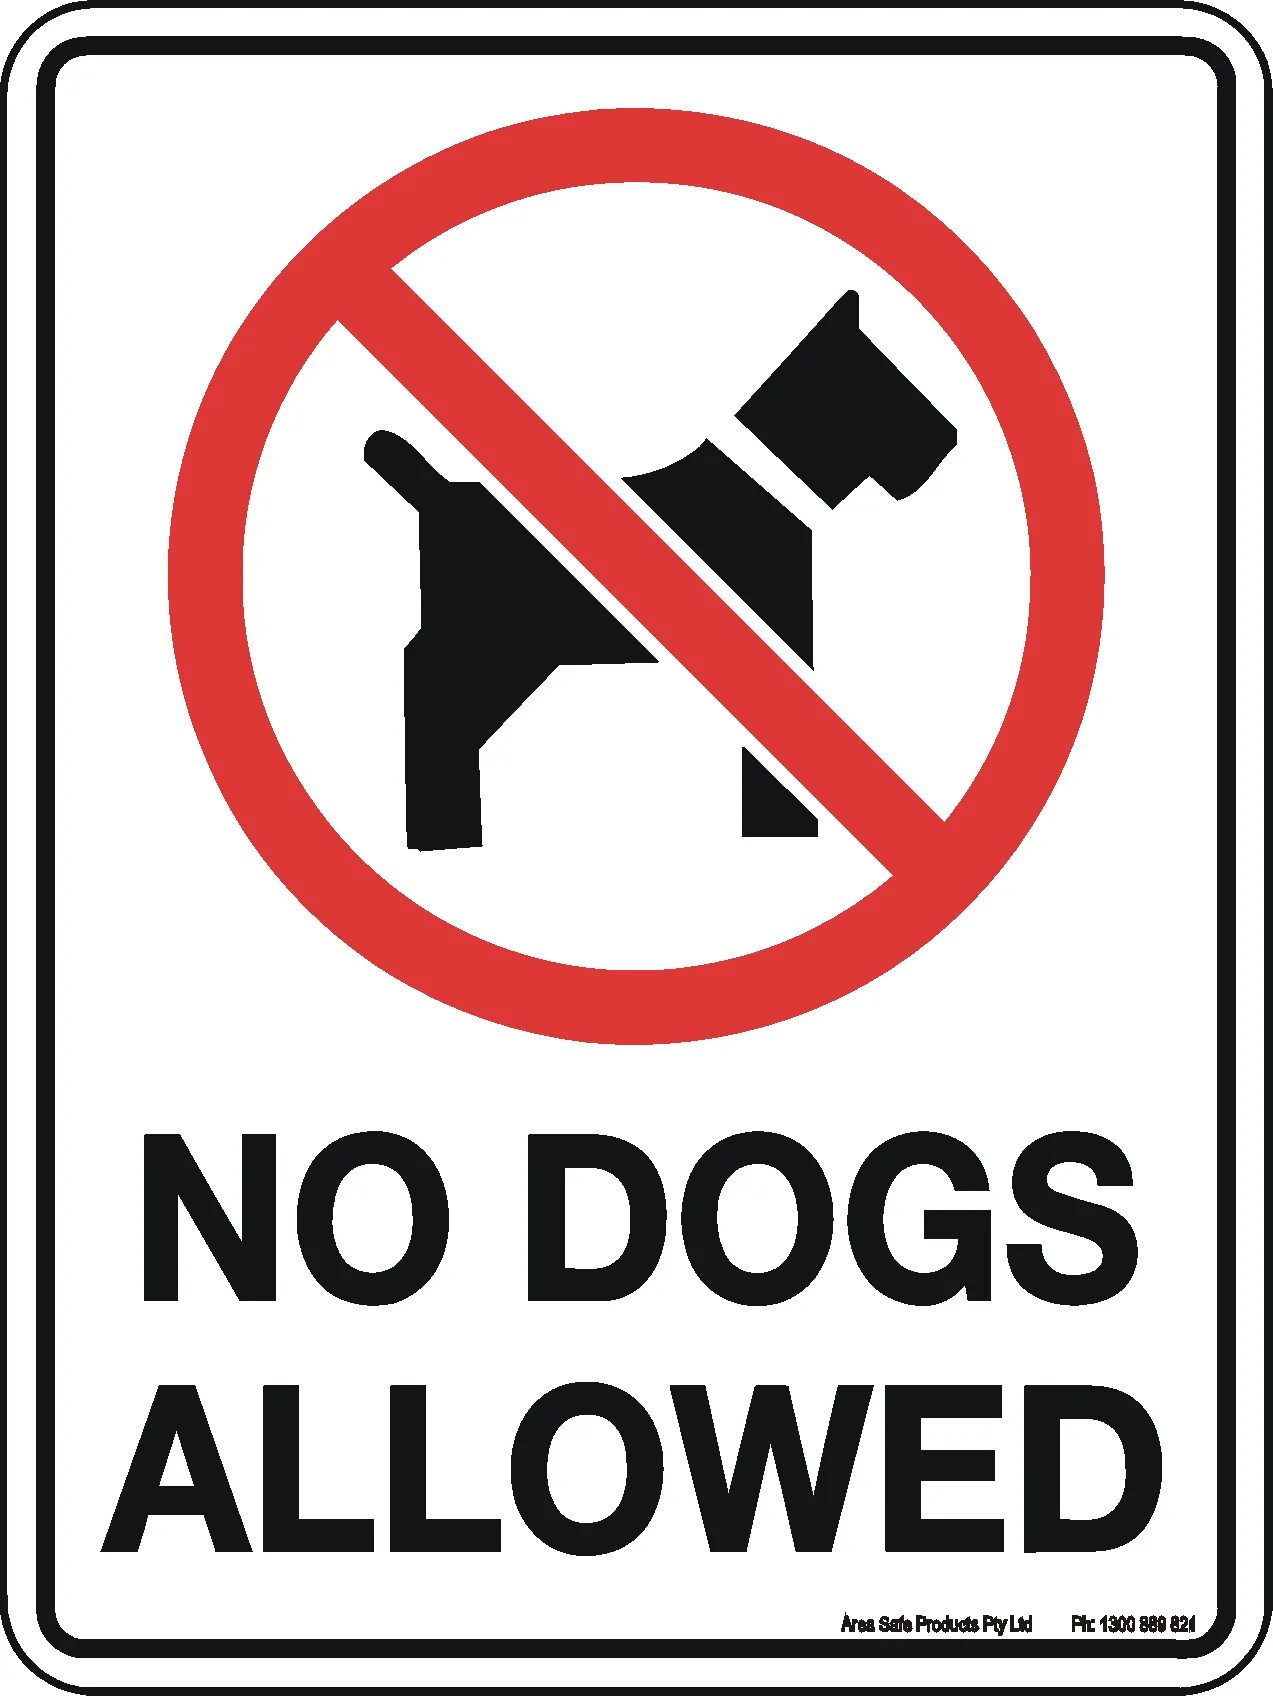 No Dogs allowed. No Dogs allowed sign. Знак Russians and Dogs are not allowed. Not allowed Dog. Not allowed speed